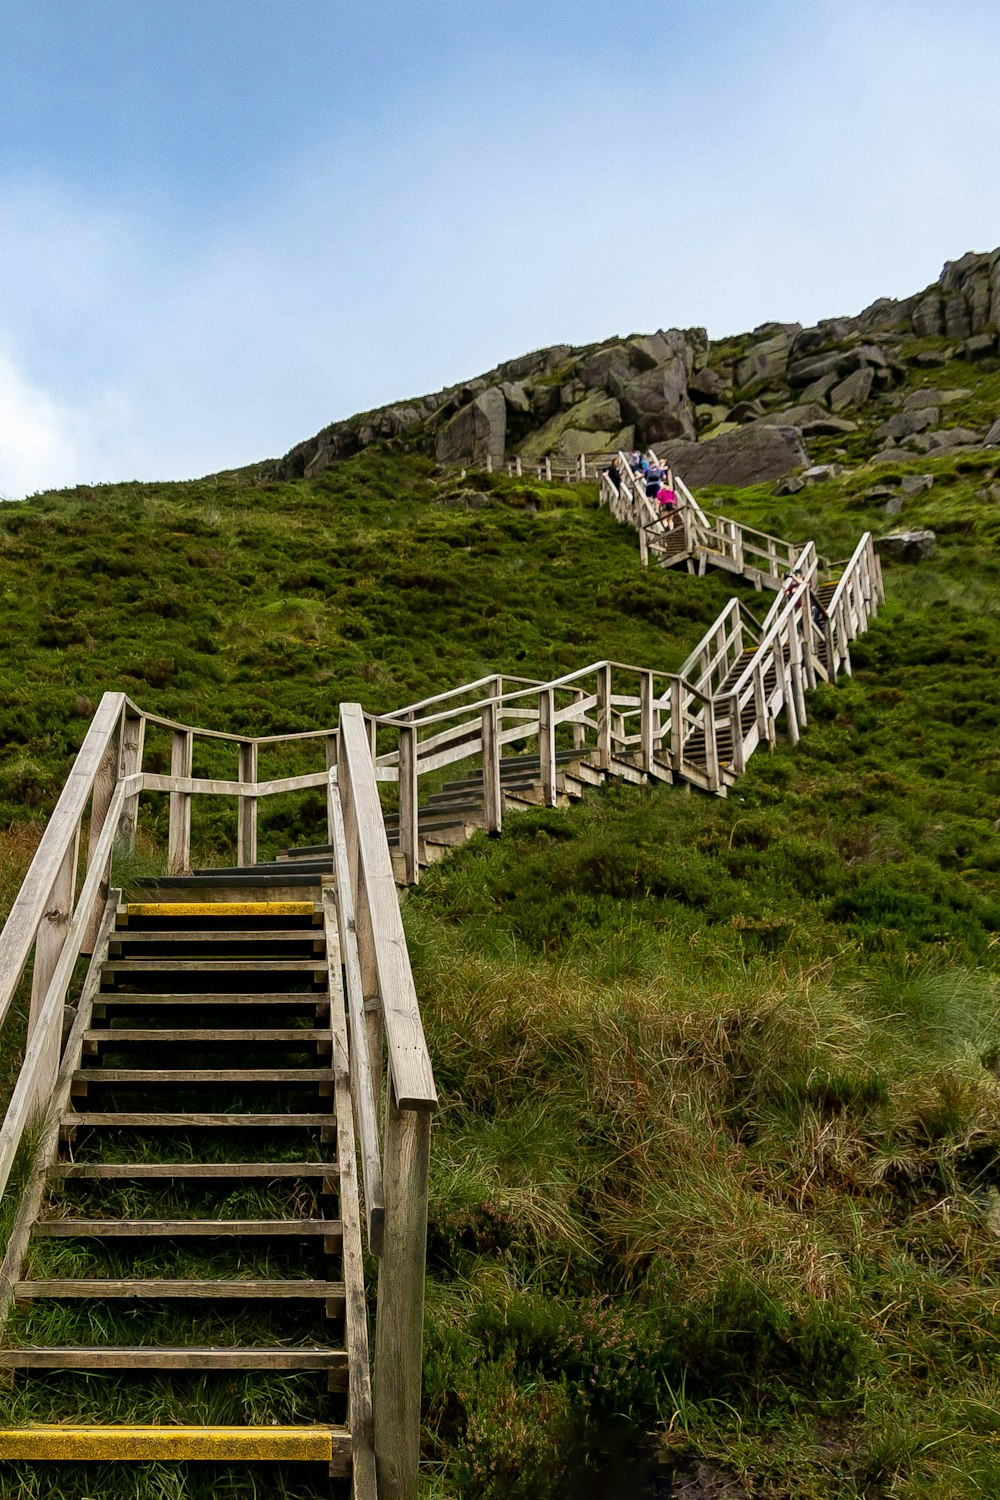 a group of people walking up a wooden staircase